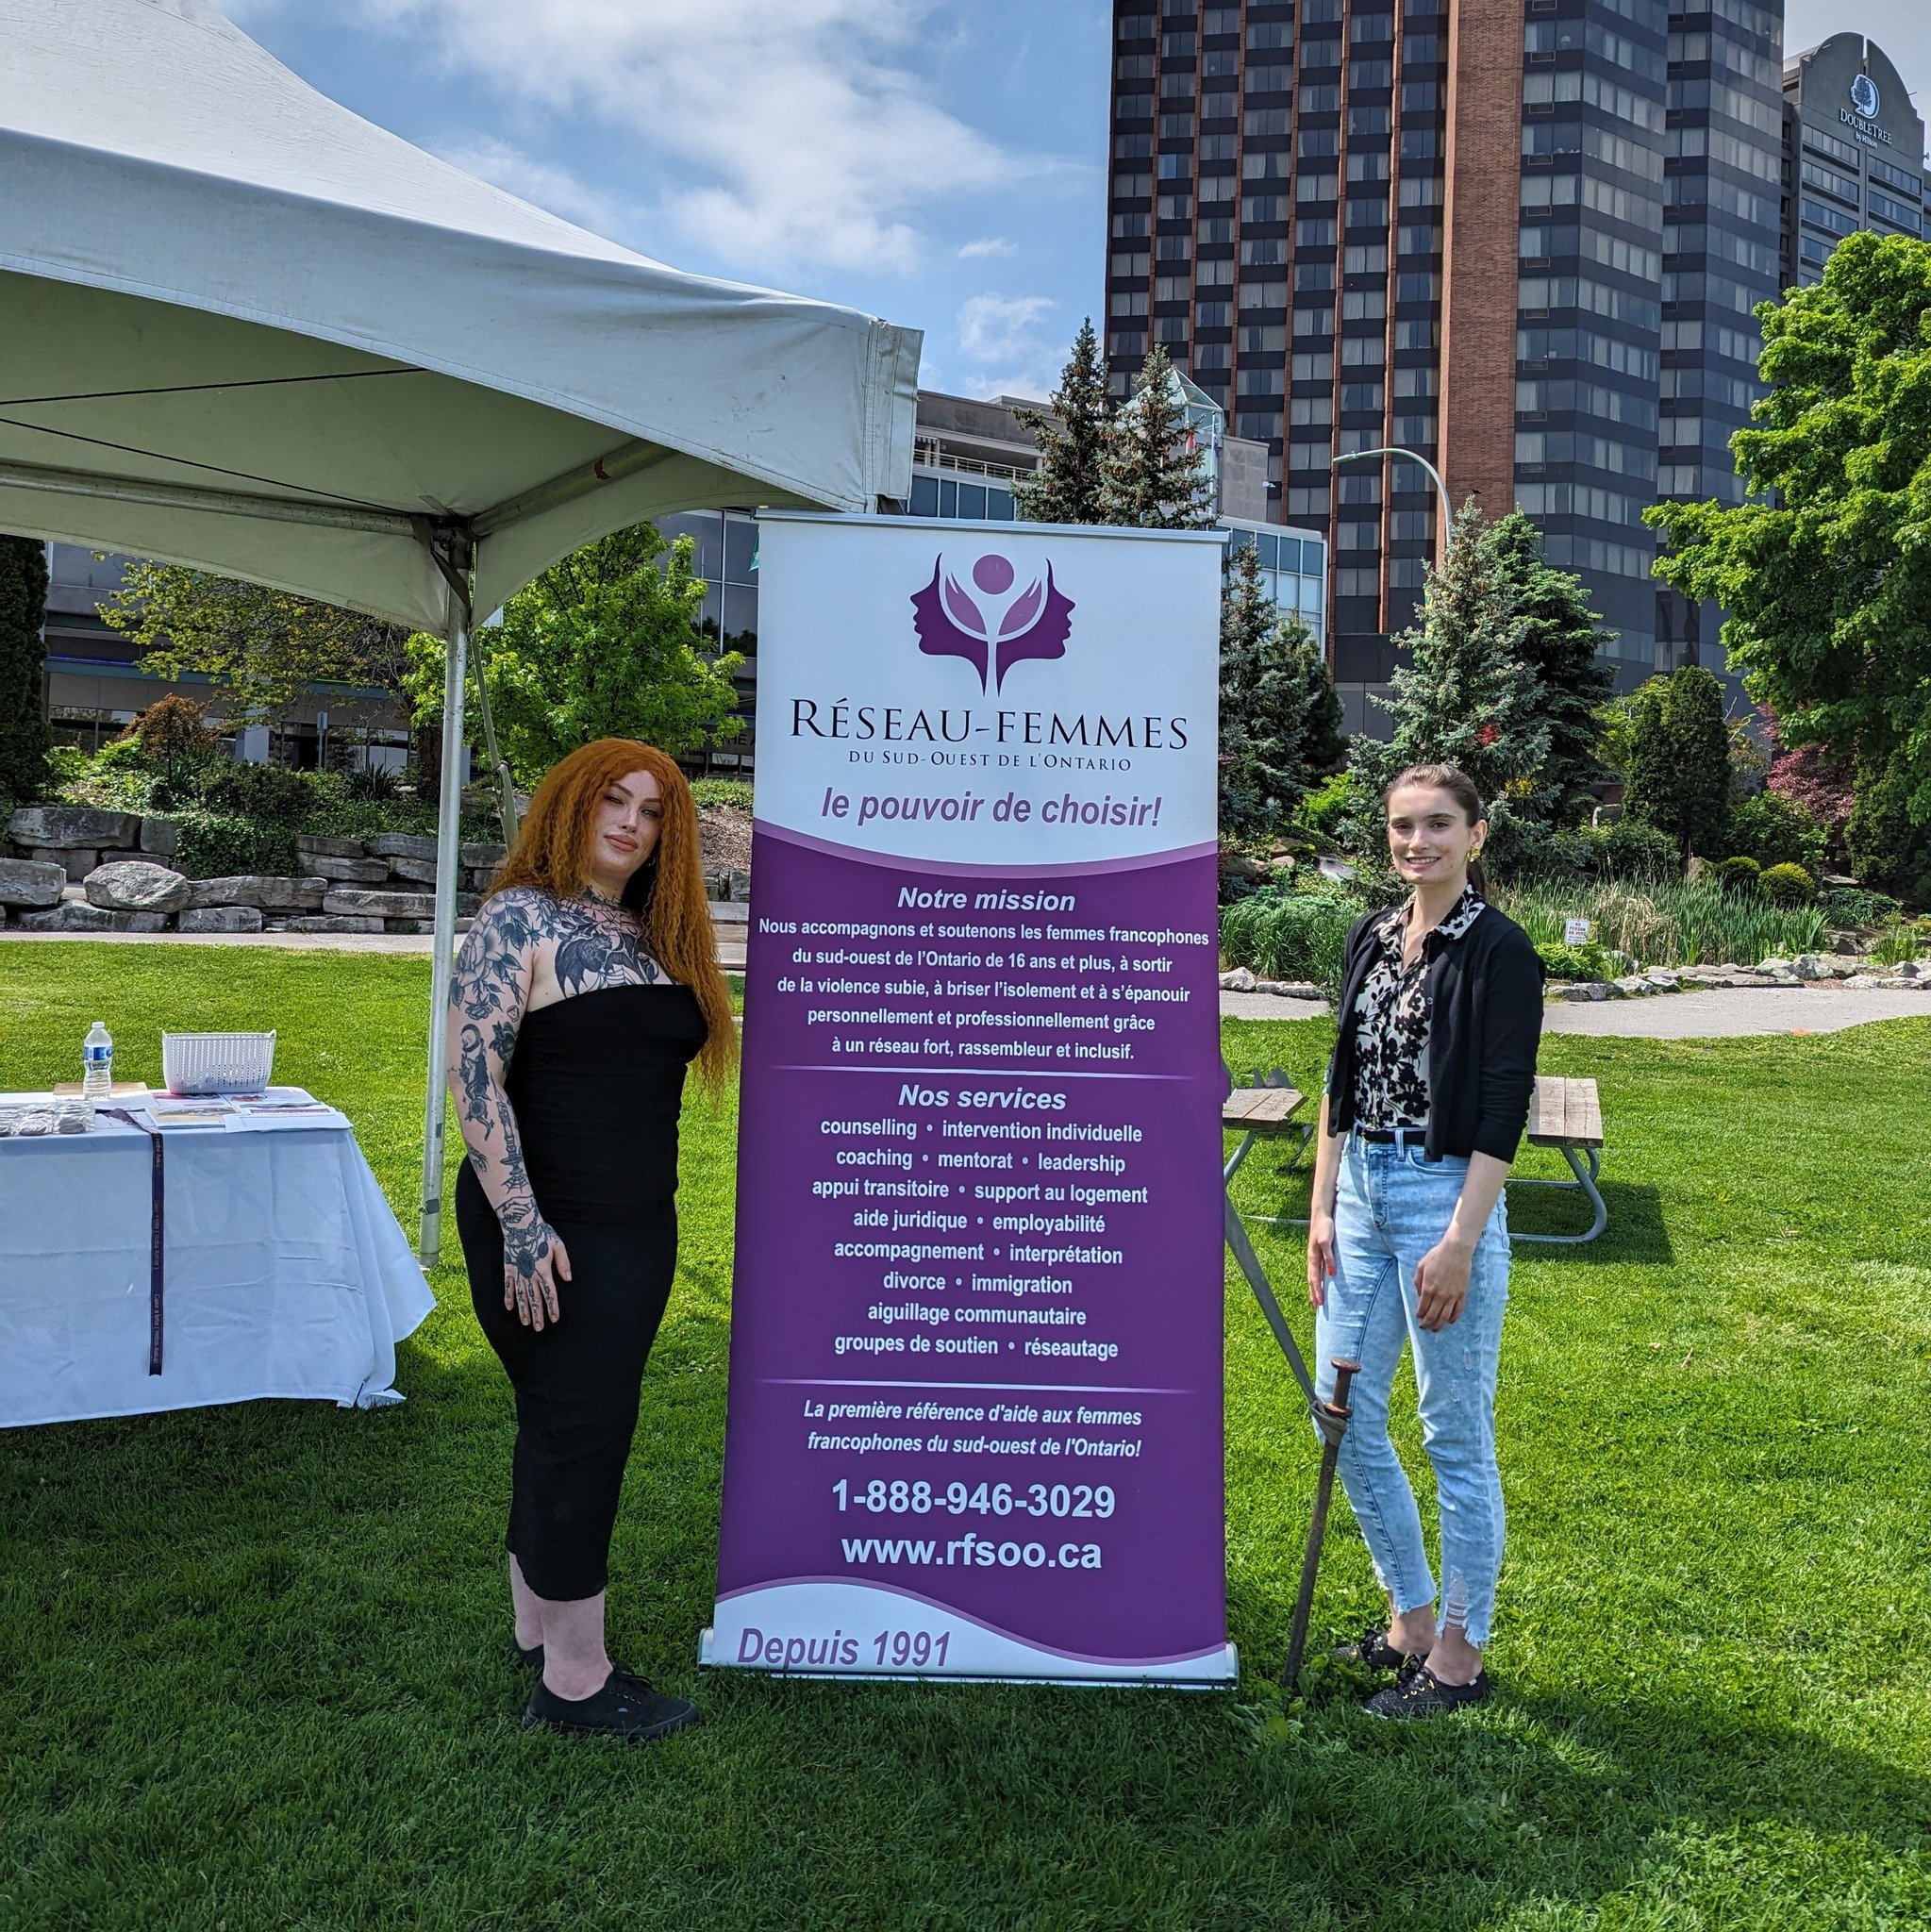 Thank you to @reseaufemmessoo for inviting us to speak at their event Vigil des Femmes Victimes de Violence Conjugale. We appreciated the opportunity to hear from the amazing organizations in our city offering support to those impacted by gender-base